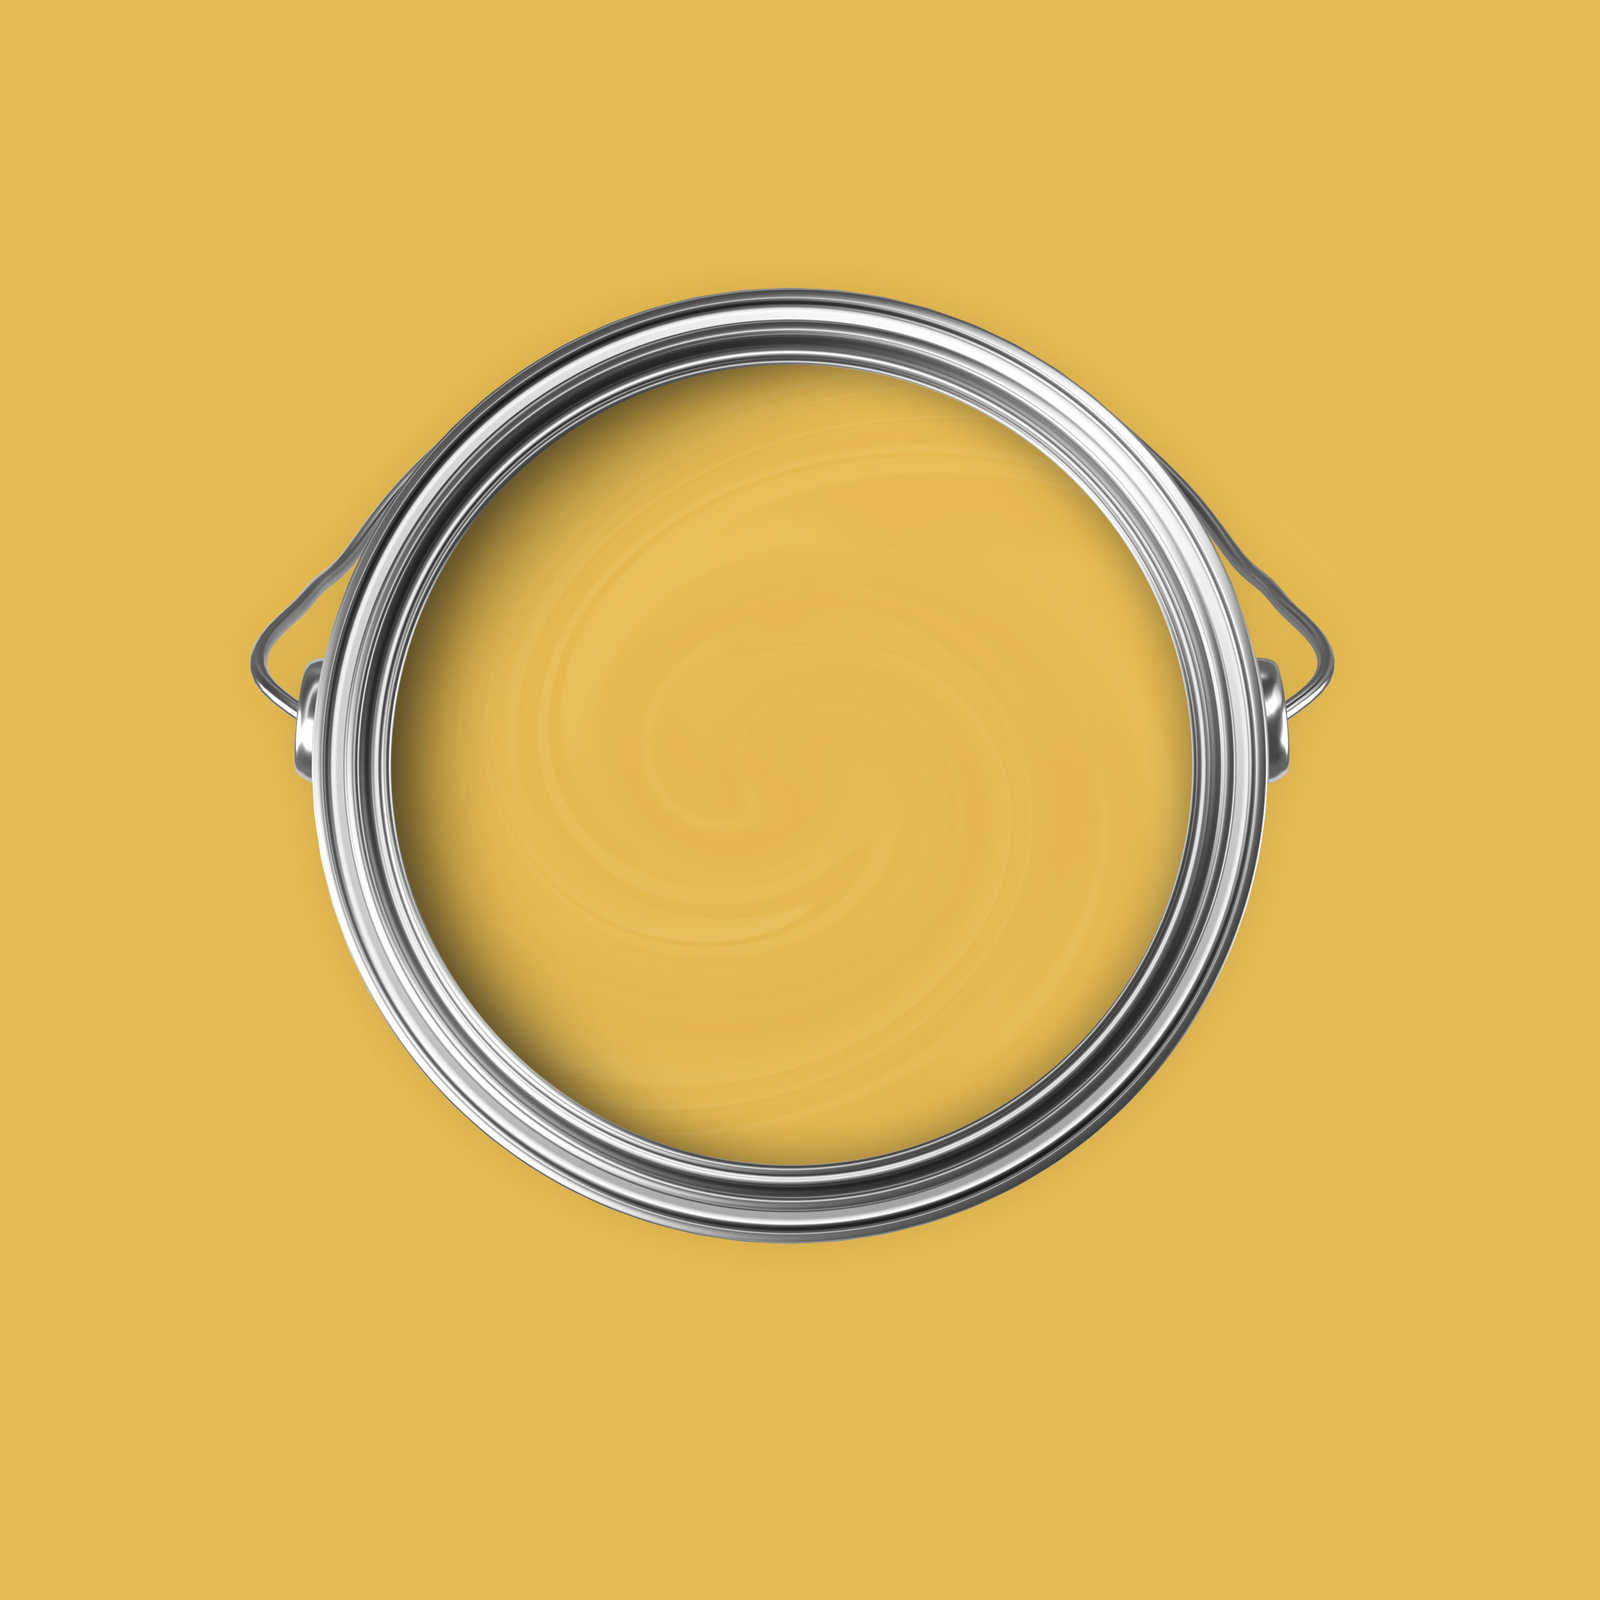             Premium Wall Paint Radiant Mustard Yellow »Juicy Yellow« NW802 – 5 litre
        